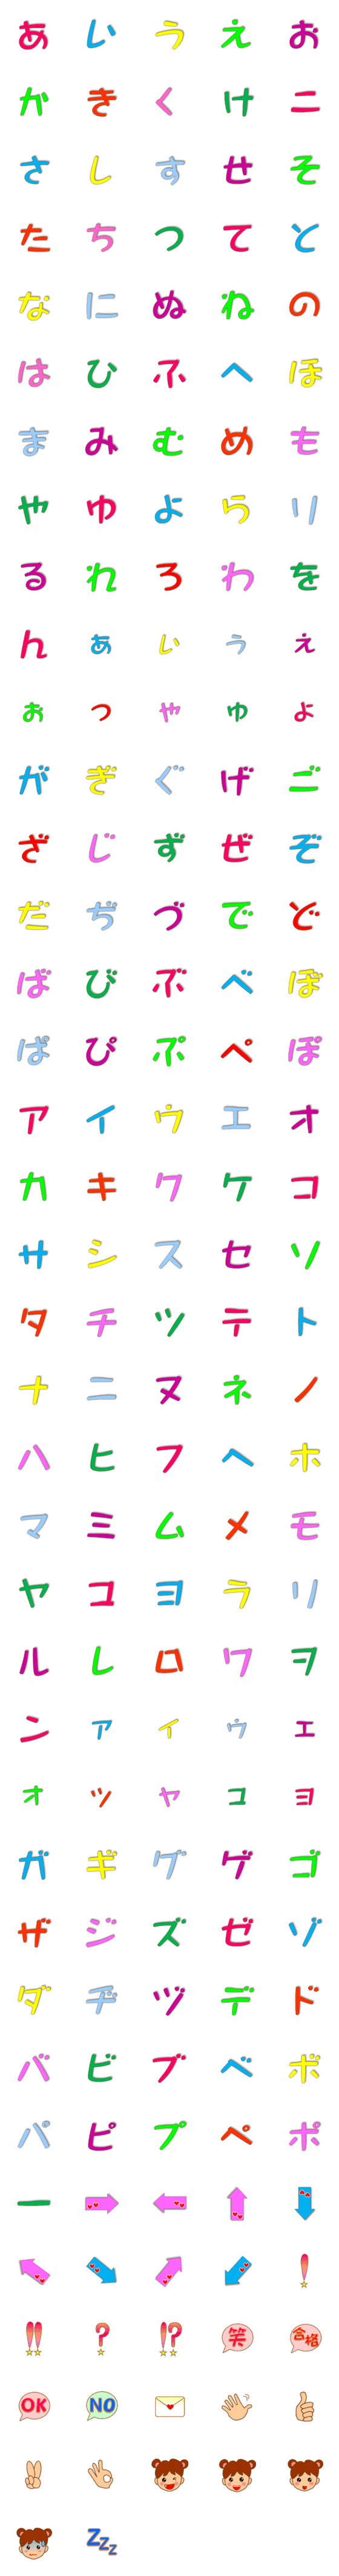 [LINE絵文字]ほんわか絵文字ver3の画像一覧